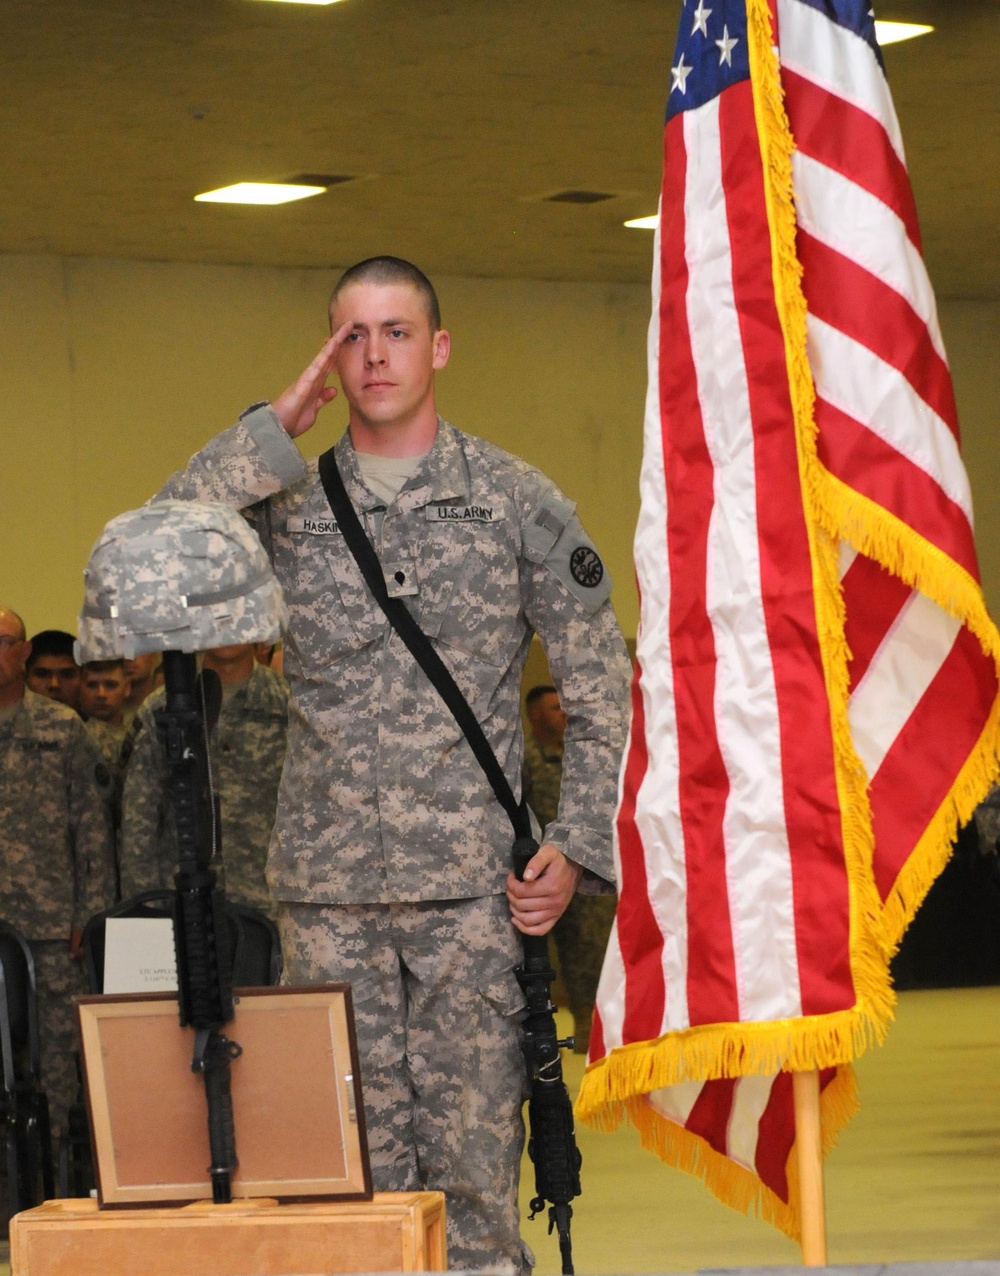 Memorial for fallen soldier focuses on life, service to country